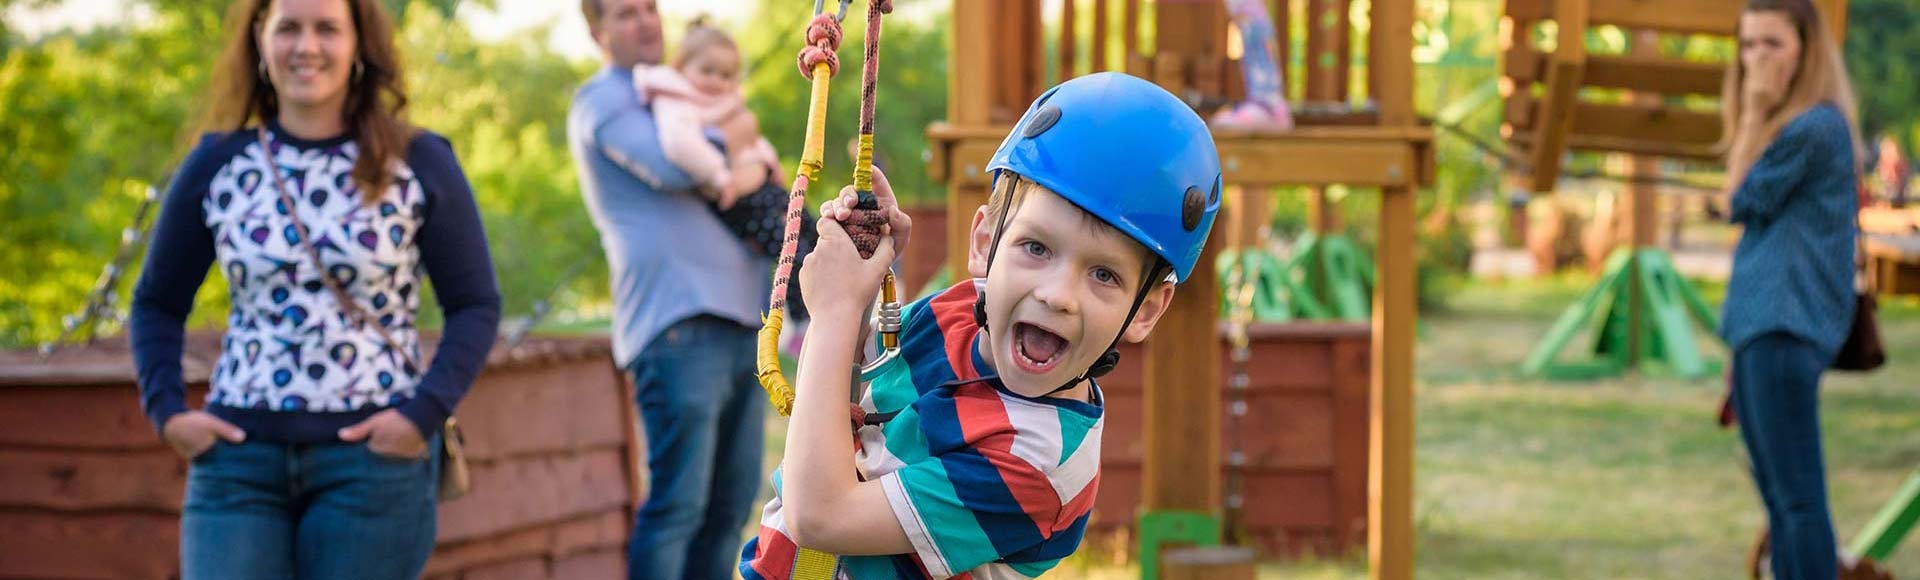 Boy gliding on a rope course with parents watching